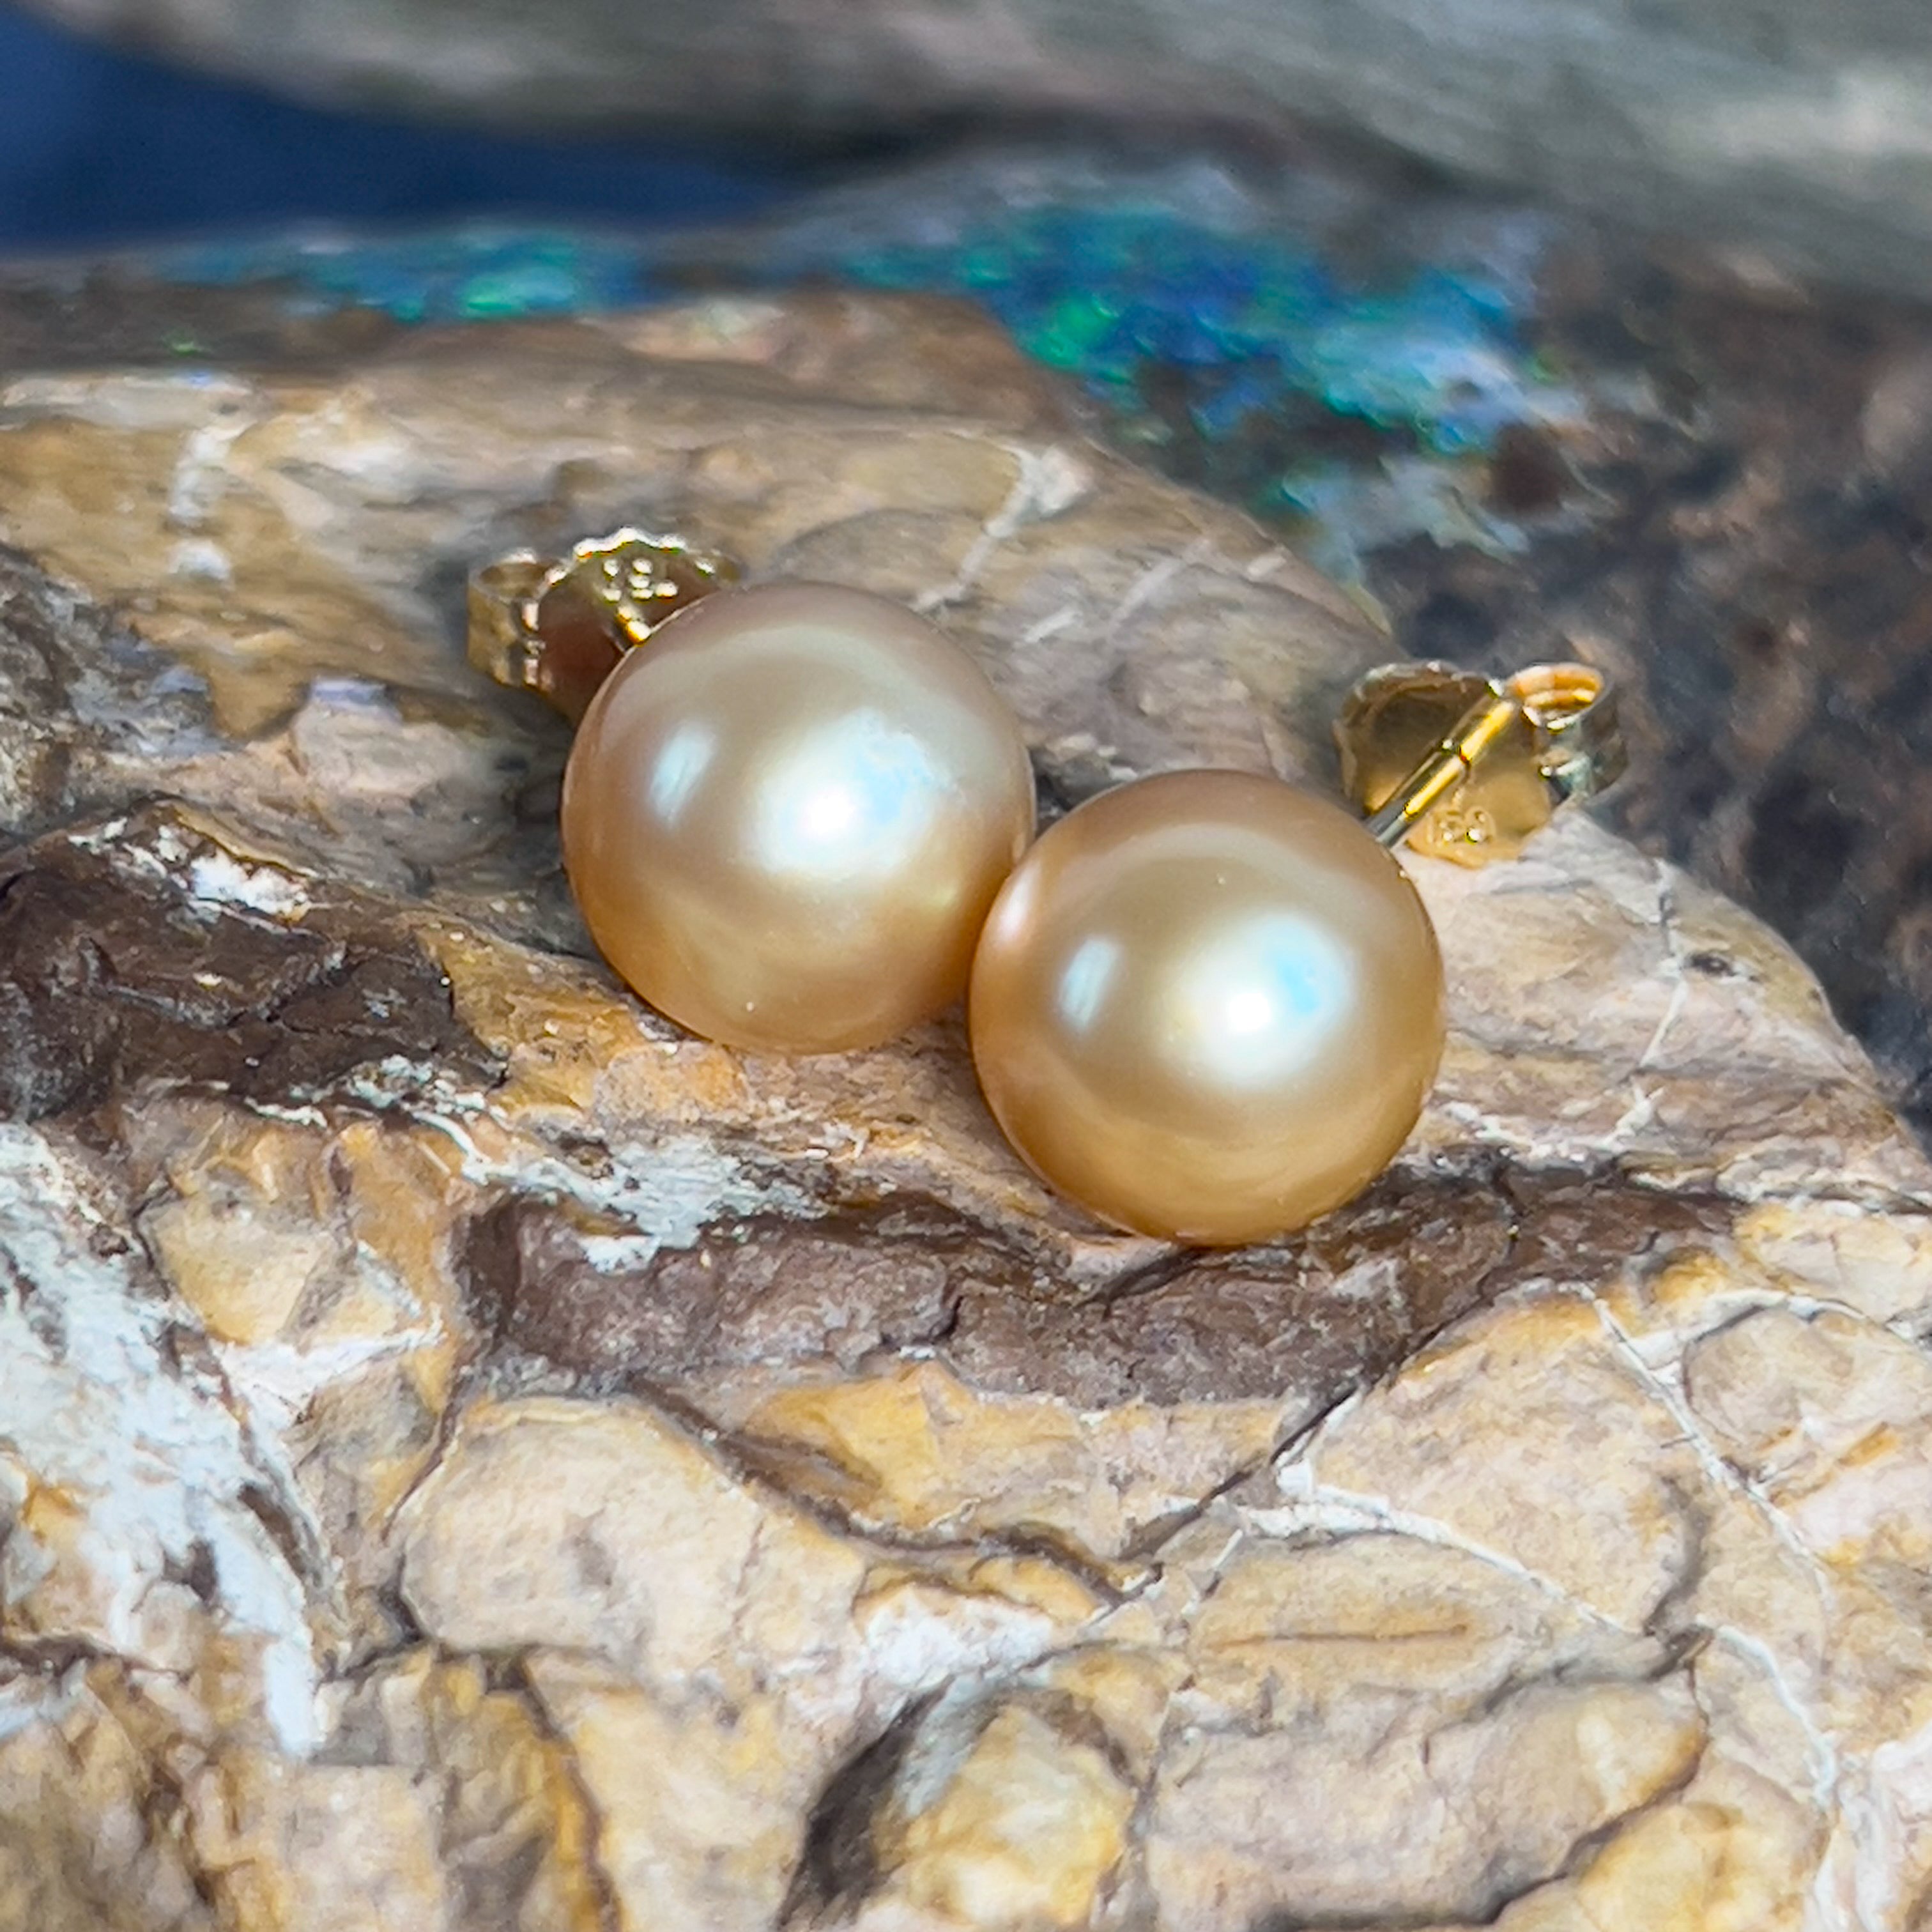 Pair of South Sea Golden pearl 9-10mm studs with 18kt Yellow Gold studs - Masterpiece Jewellery Opal & Gems Sydney Australia | Online Shop